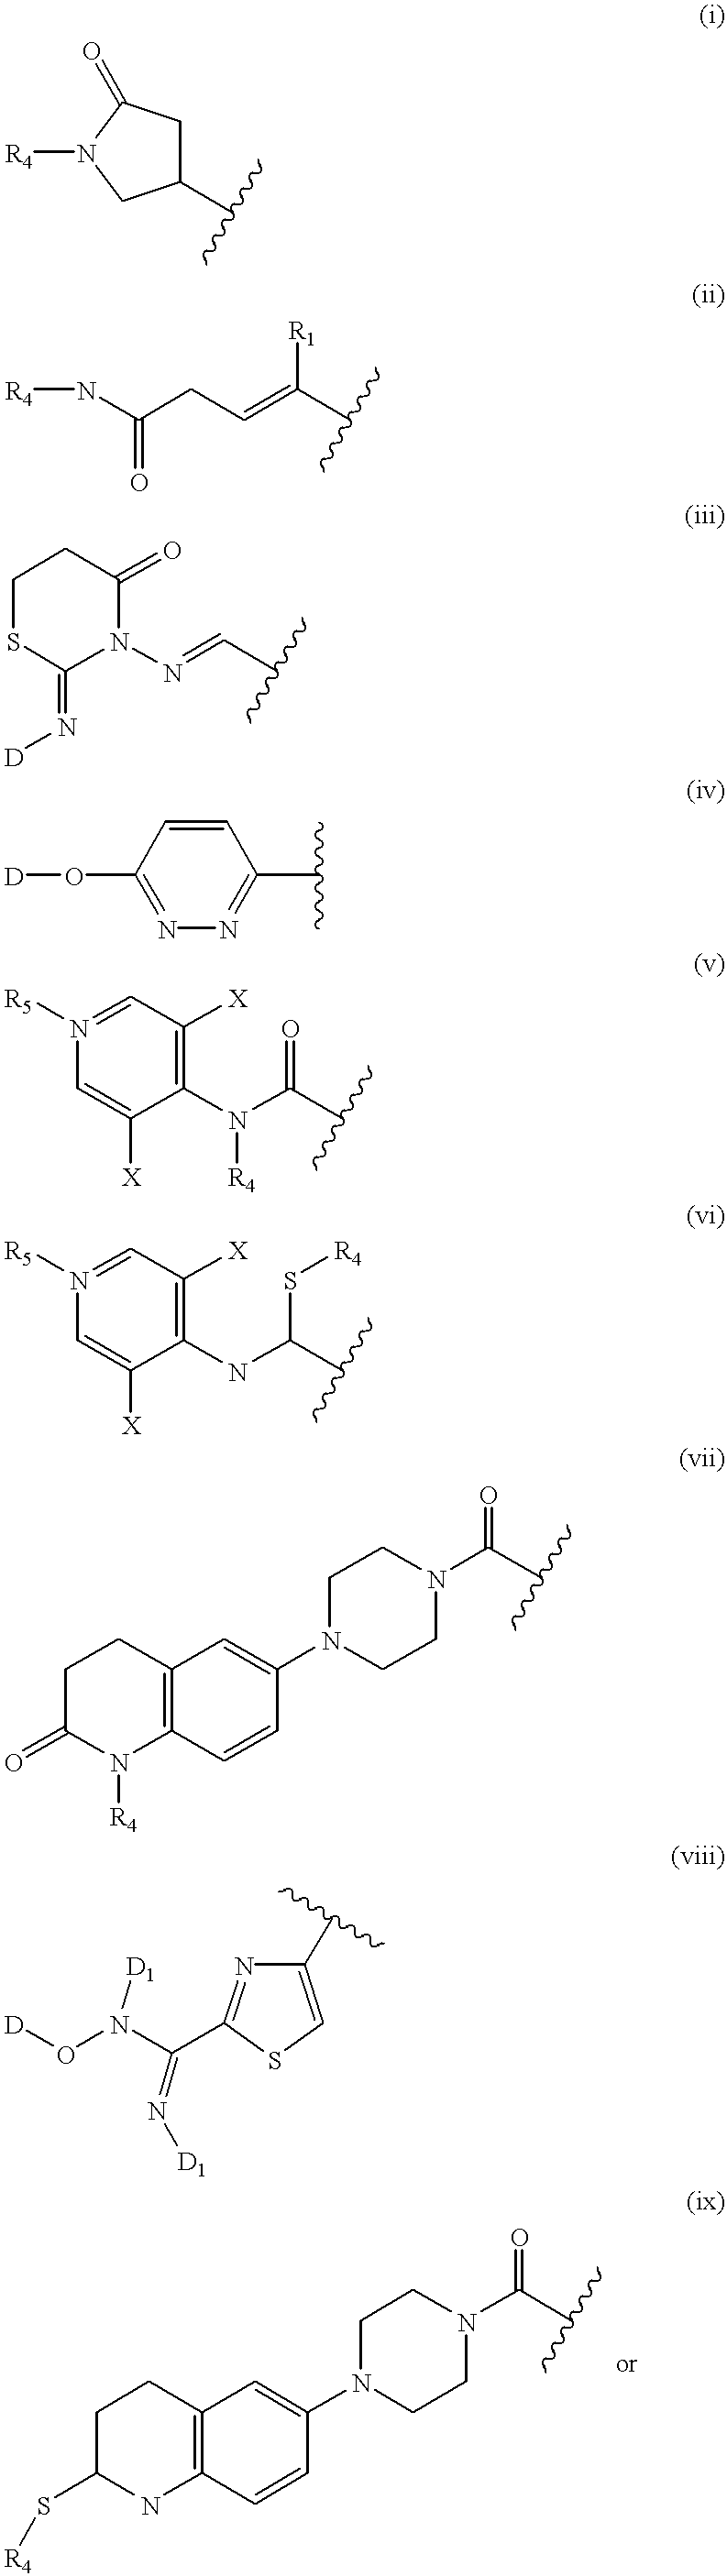 Nitrosated and nitrosylated phosphodiestrase inhibitor compounds, compositions and their uses